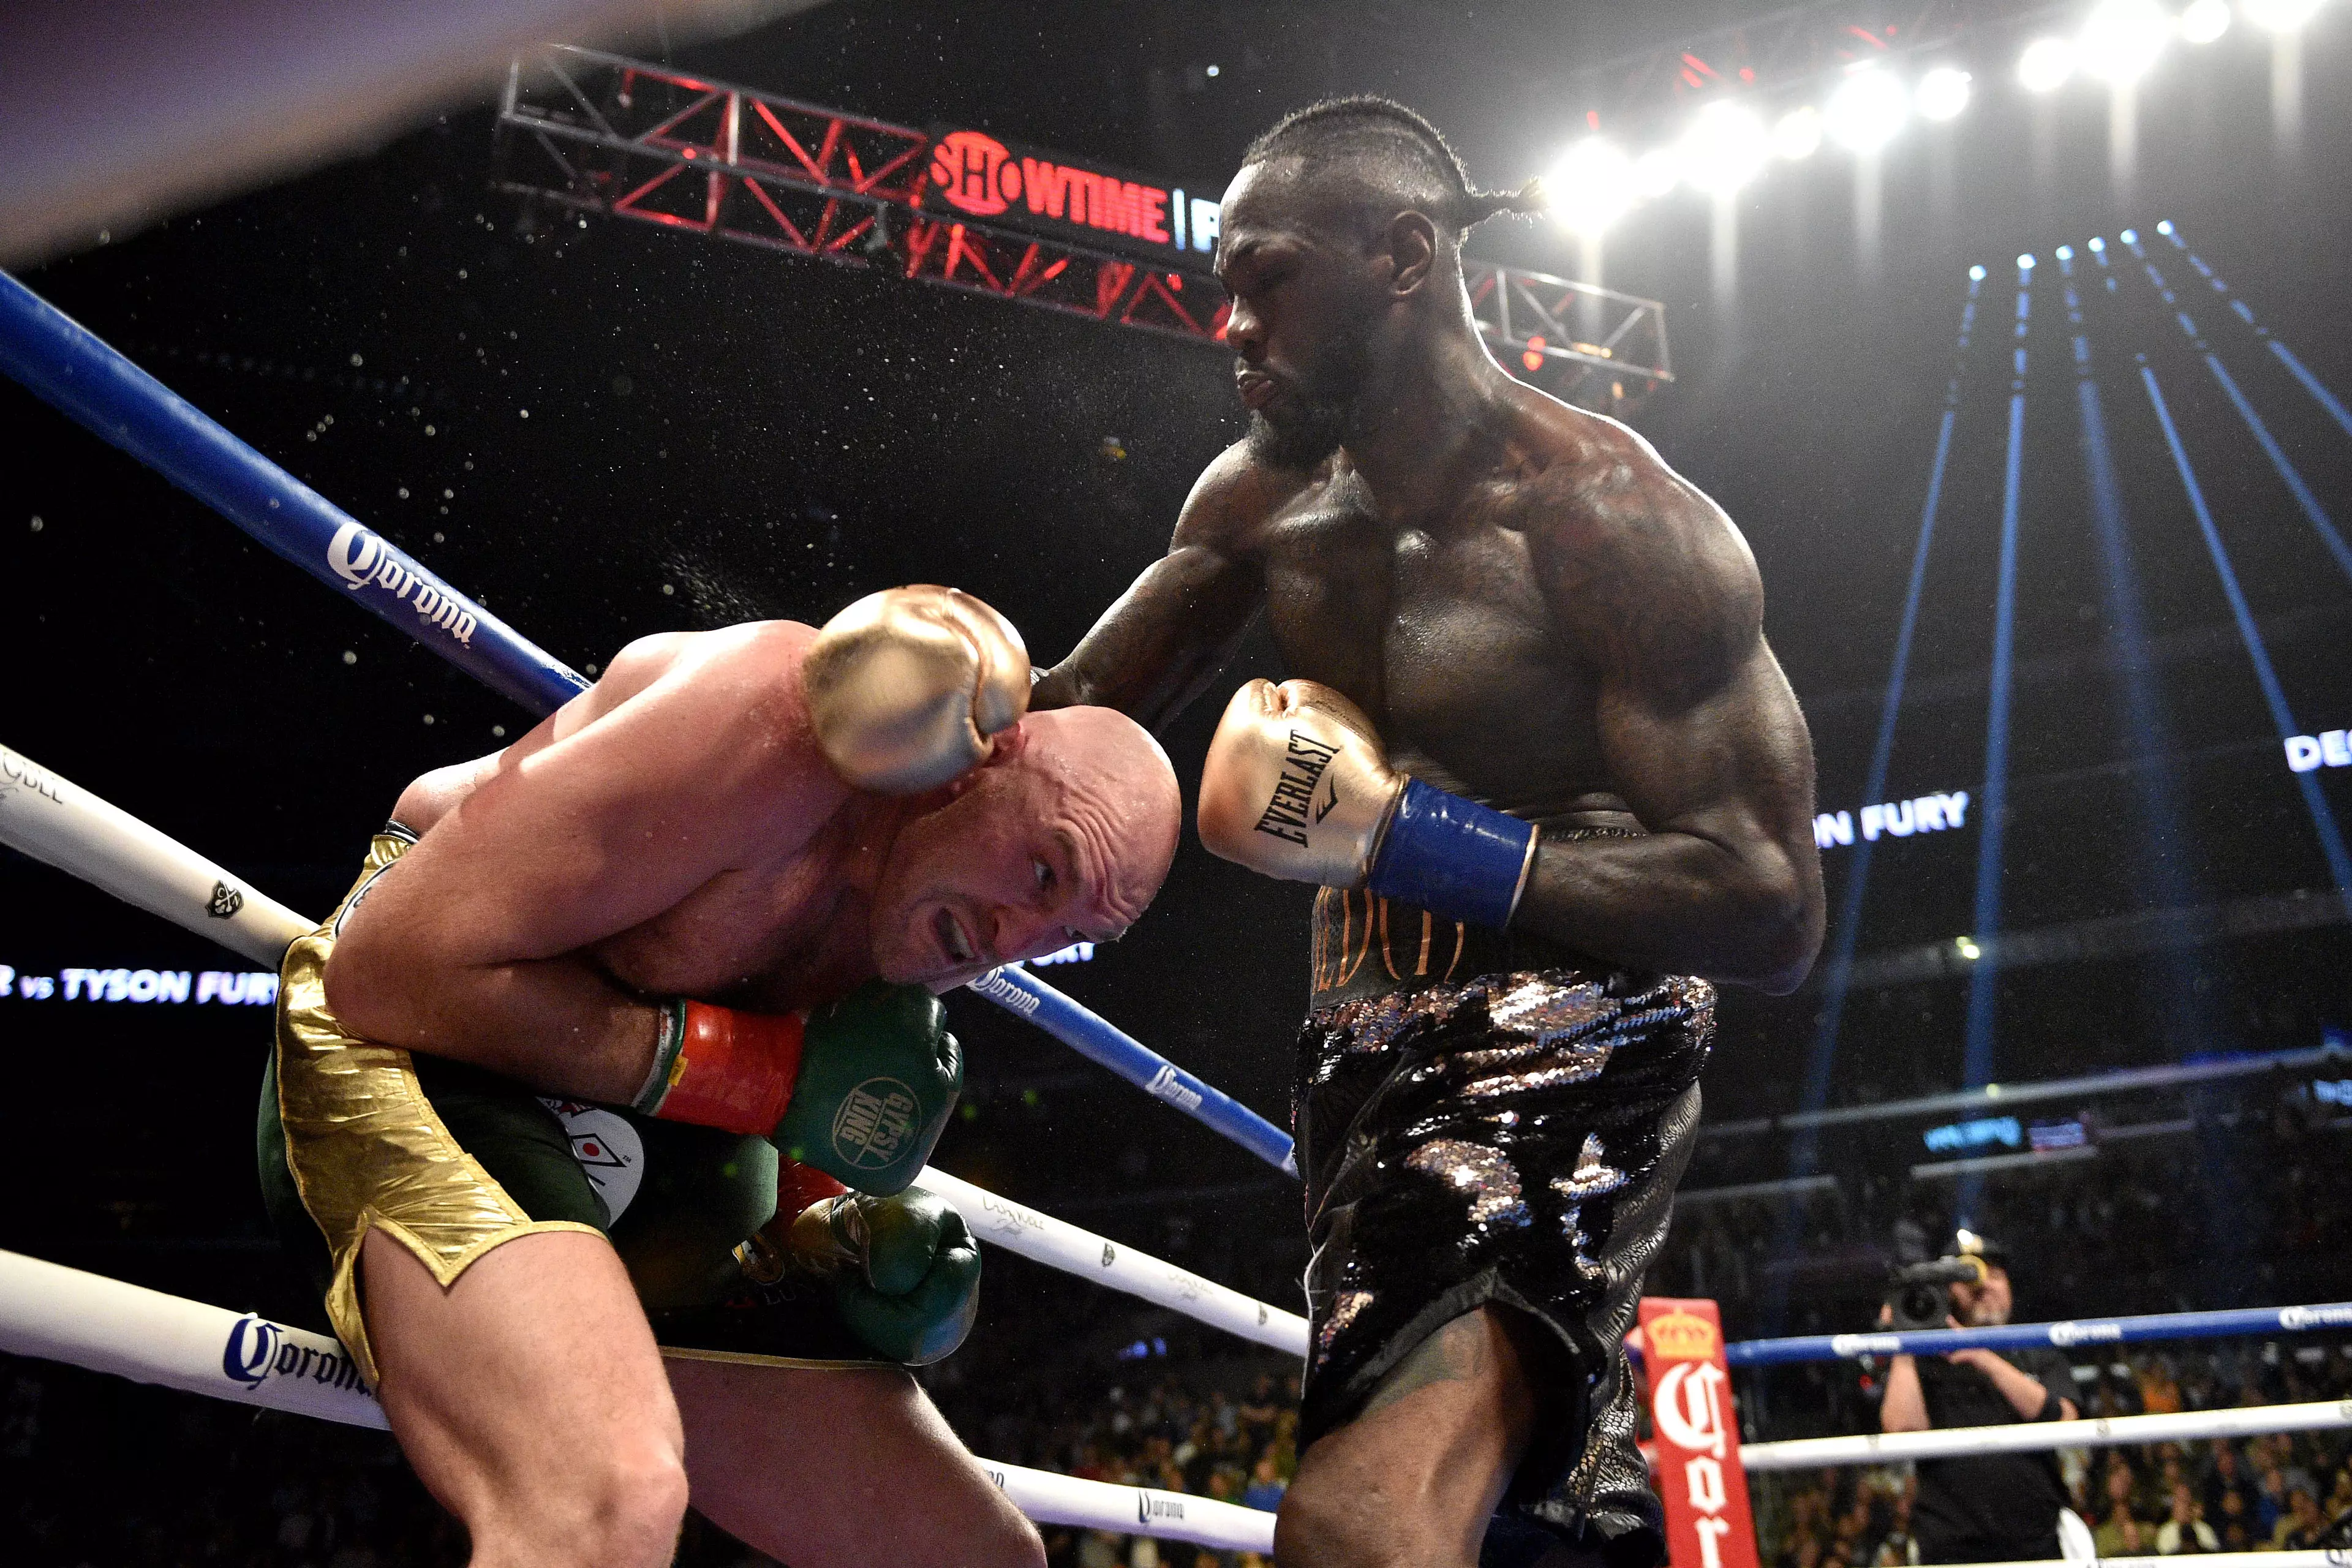 Tyson Fury gets whacked Deontay Wilder.